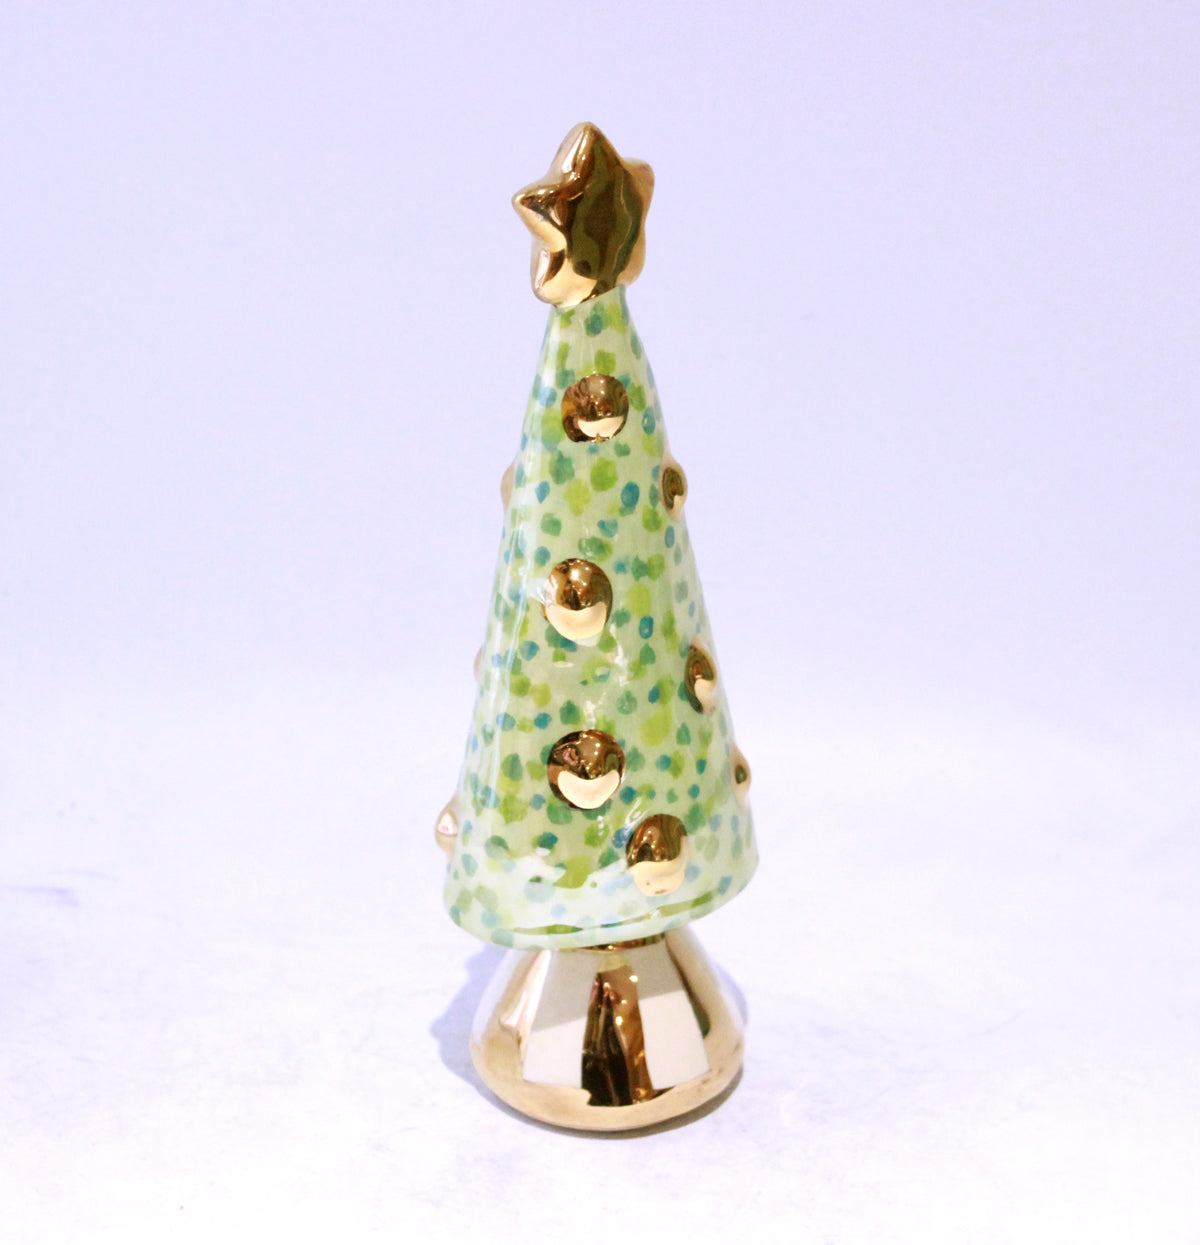 Small Christmas Tree in Green Confetti with Gold Striped Base